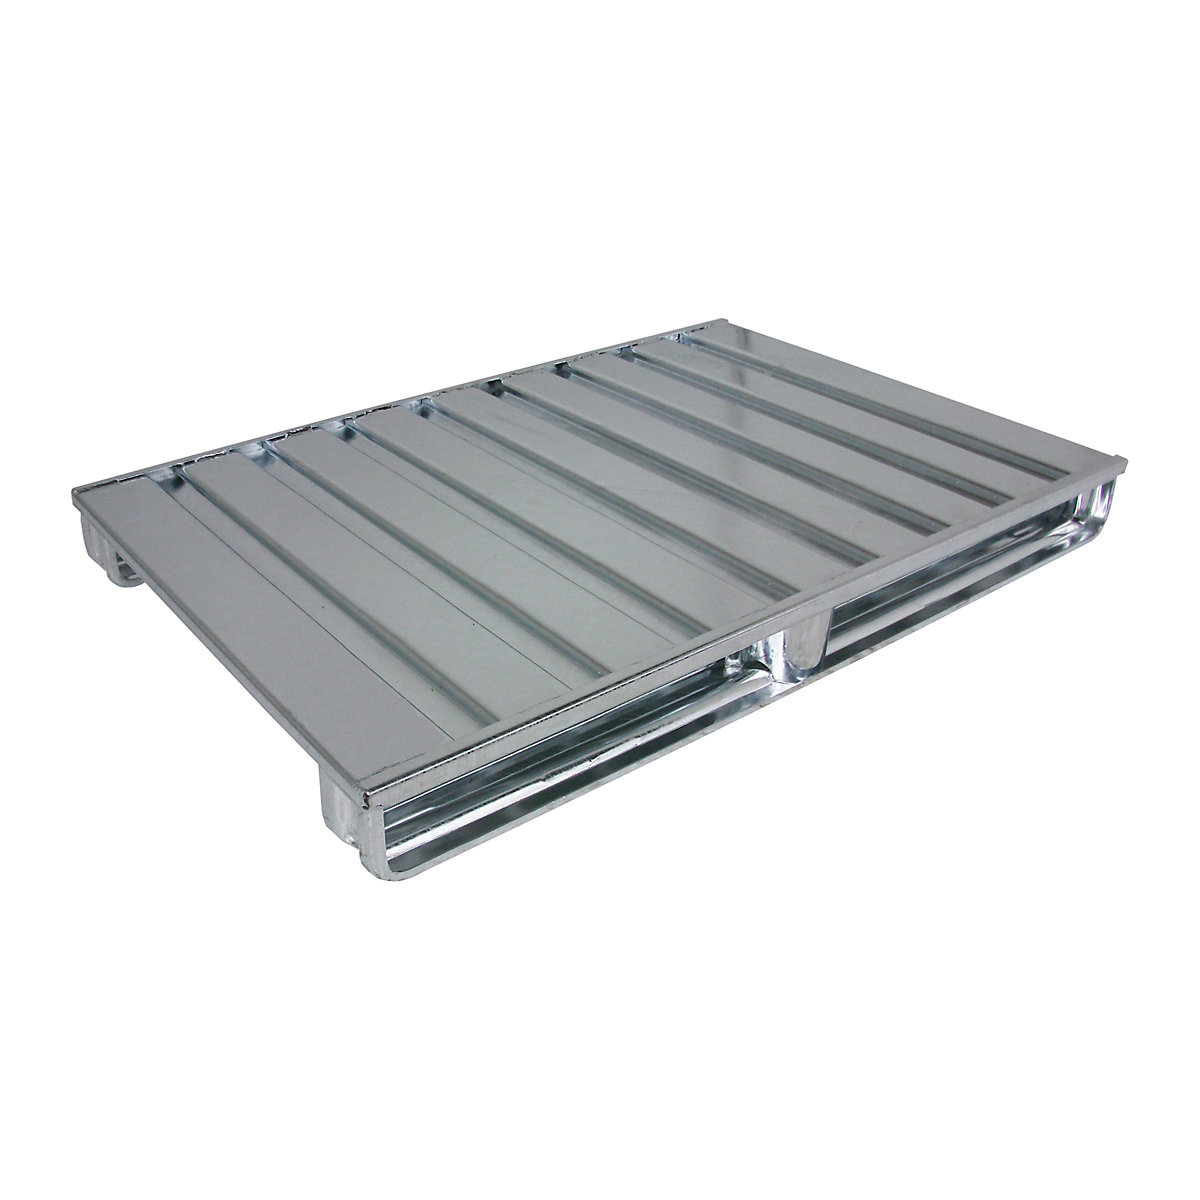 Flat steel pallet – Heson, LxW 1000 x 800 mm, max. load 2000 kg, zinc plated, 10+ items-3